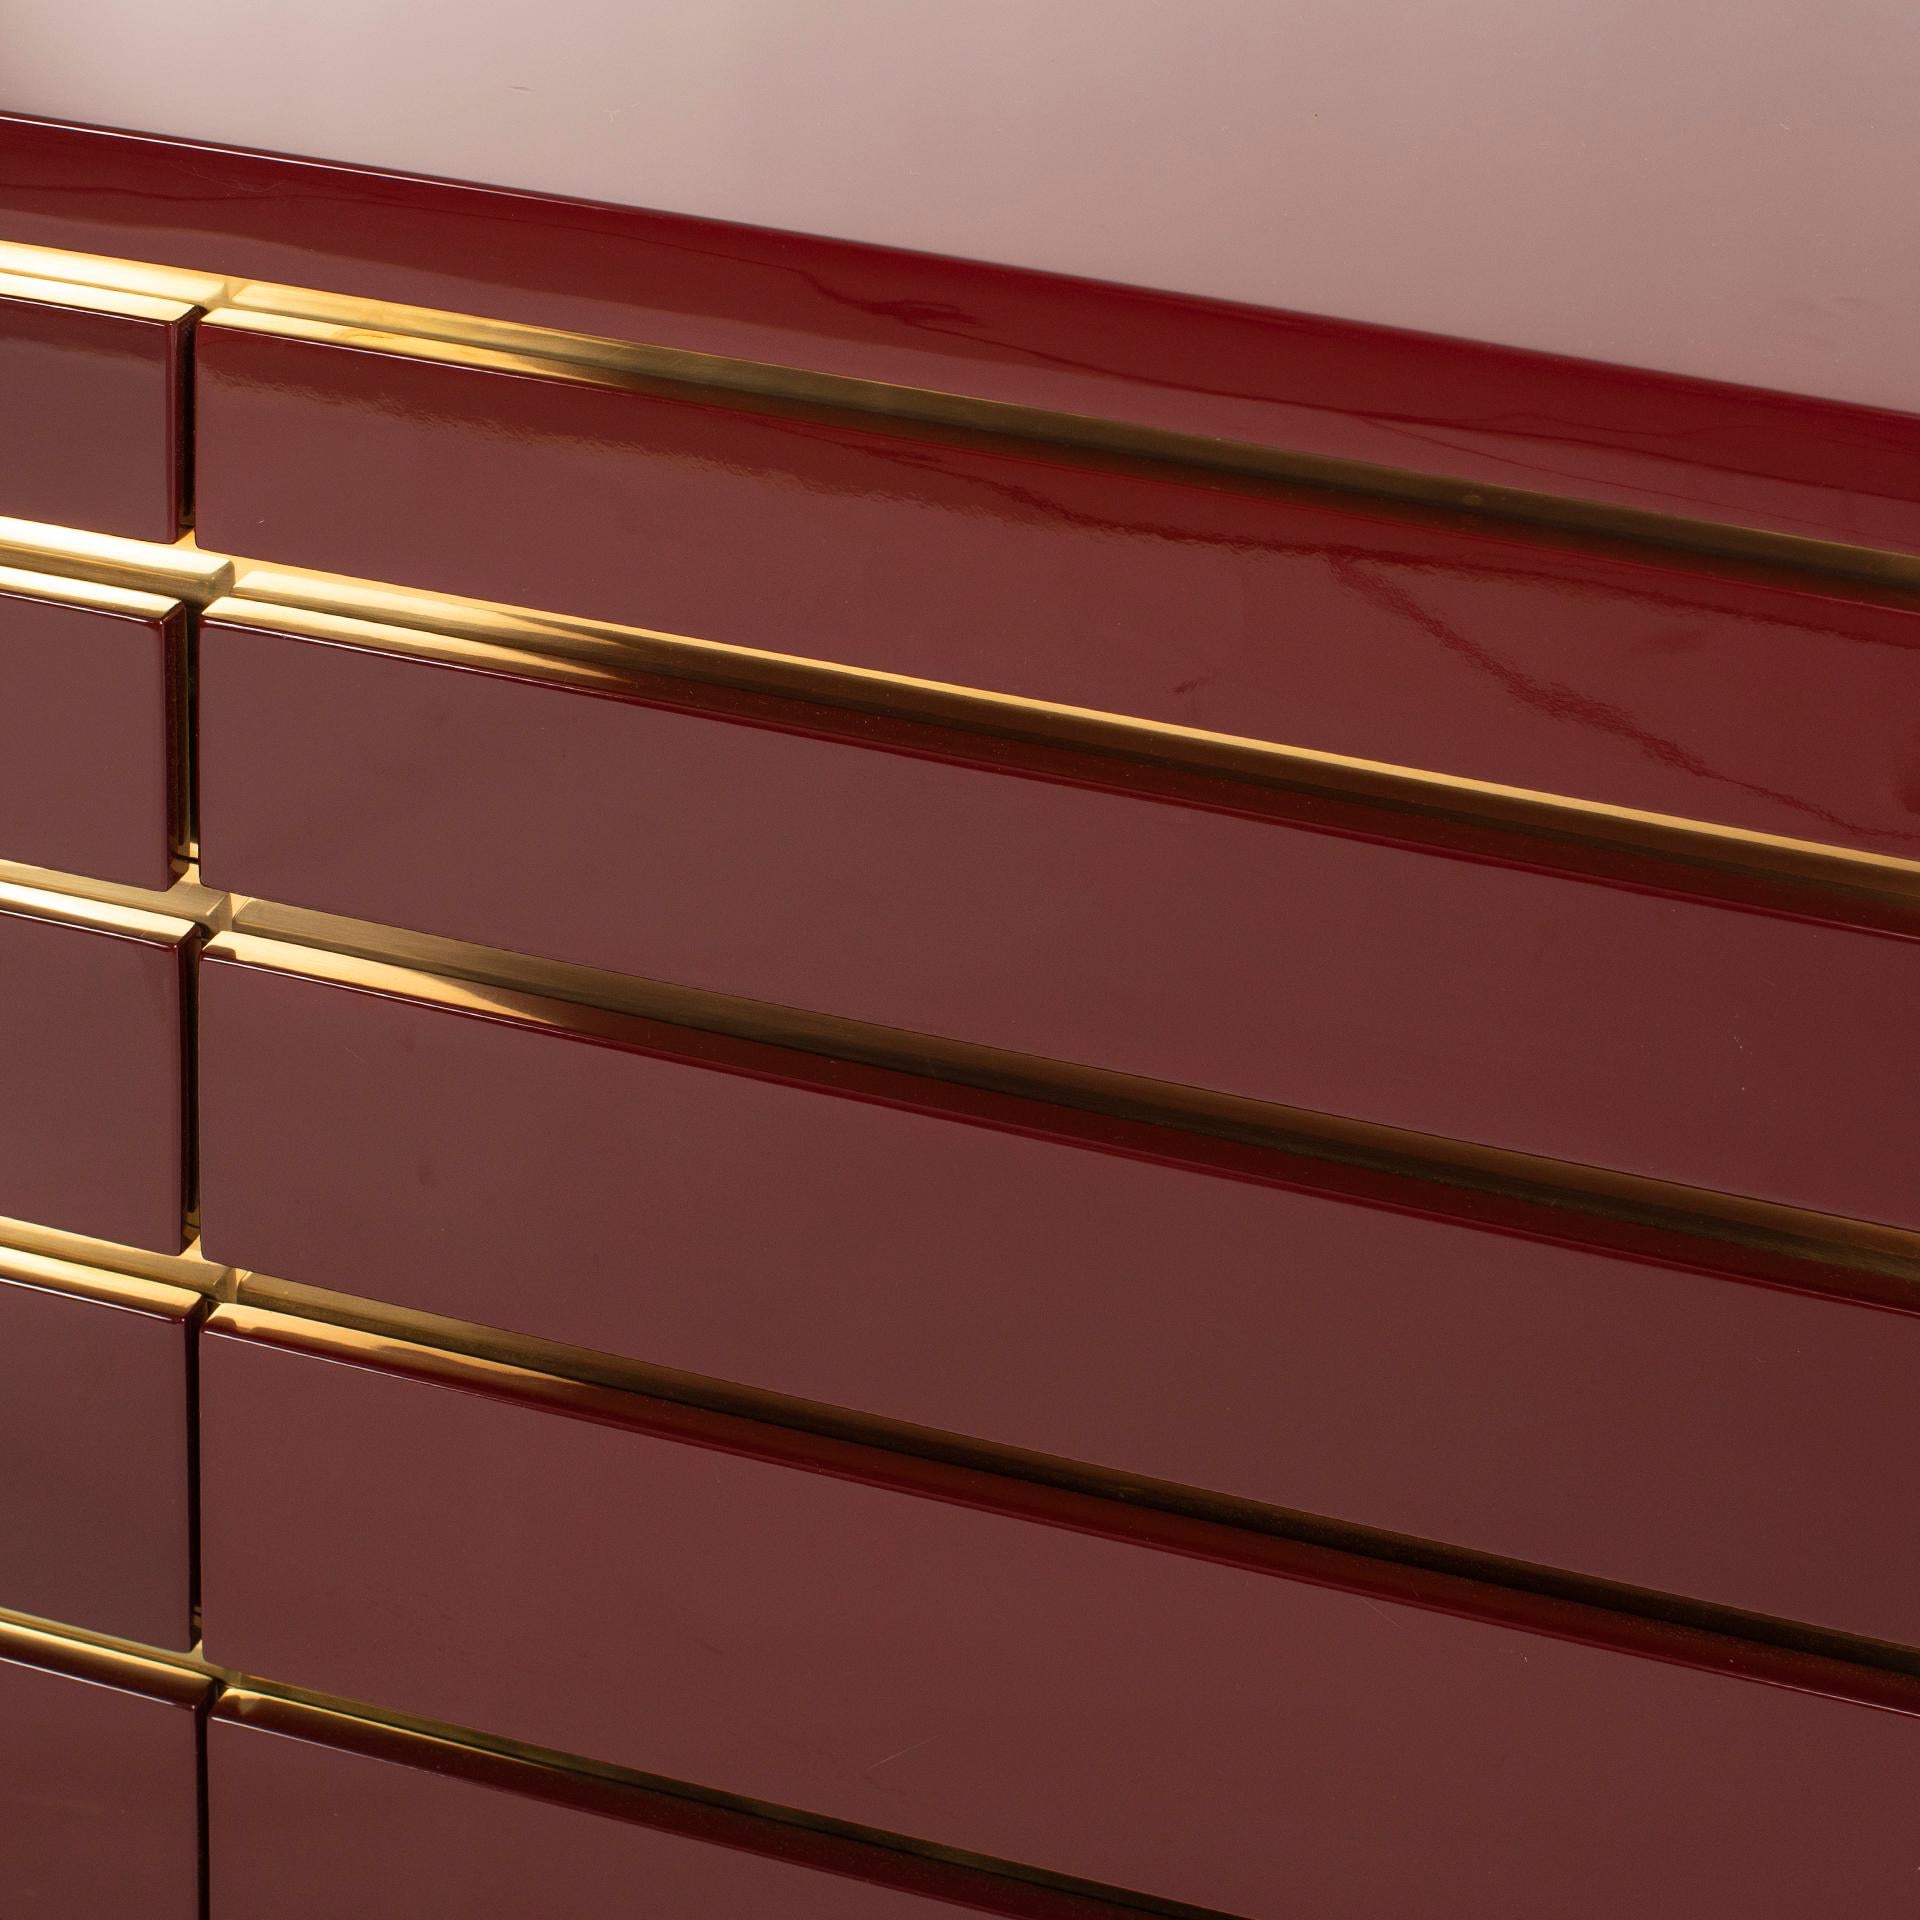 Lacquered French Mid-Century Dresser in Burgundy Red and Gold 1970s by Jean Claude Mahey